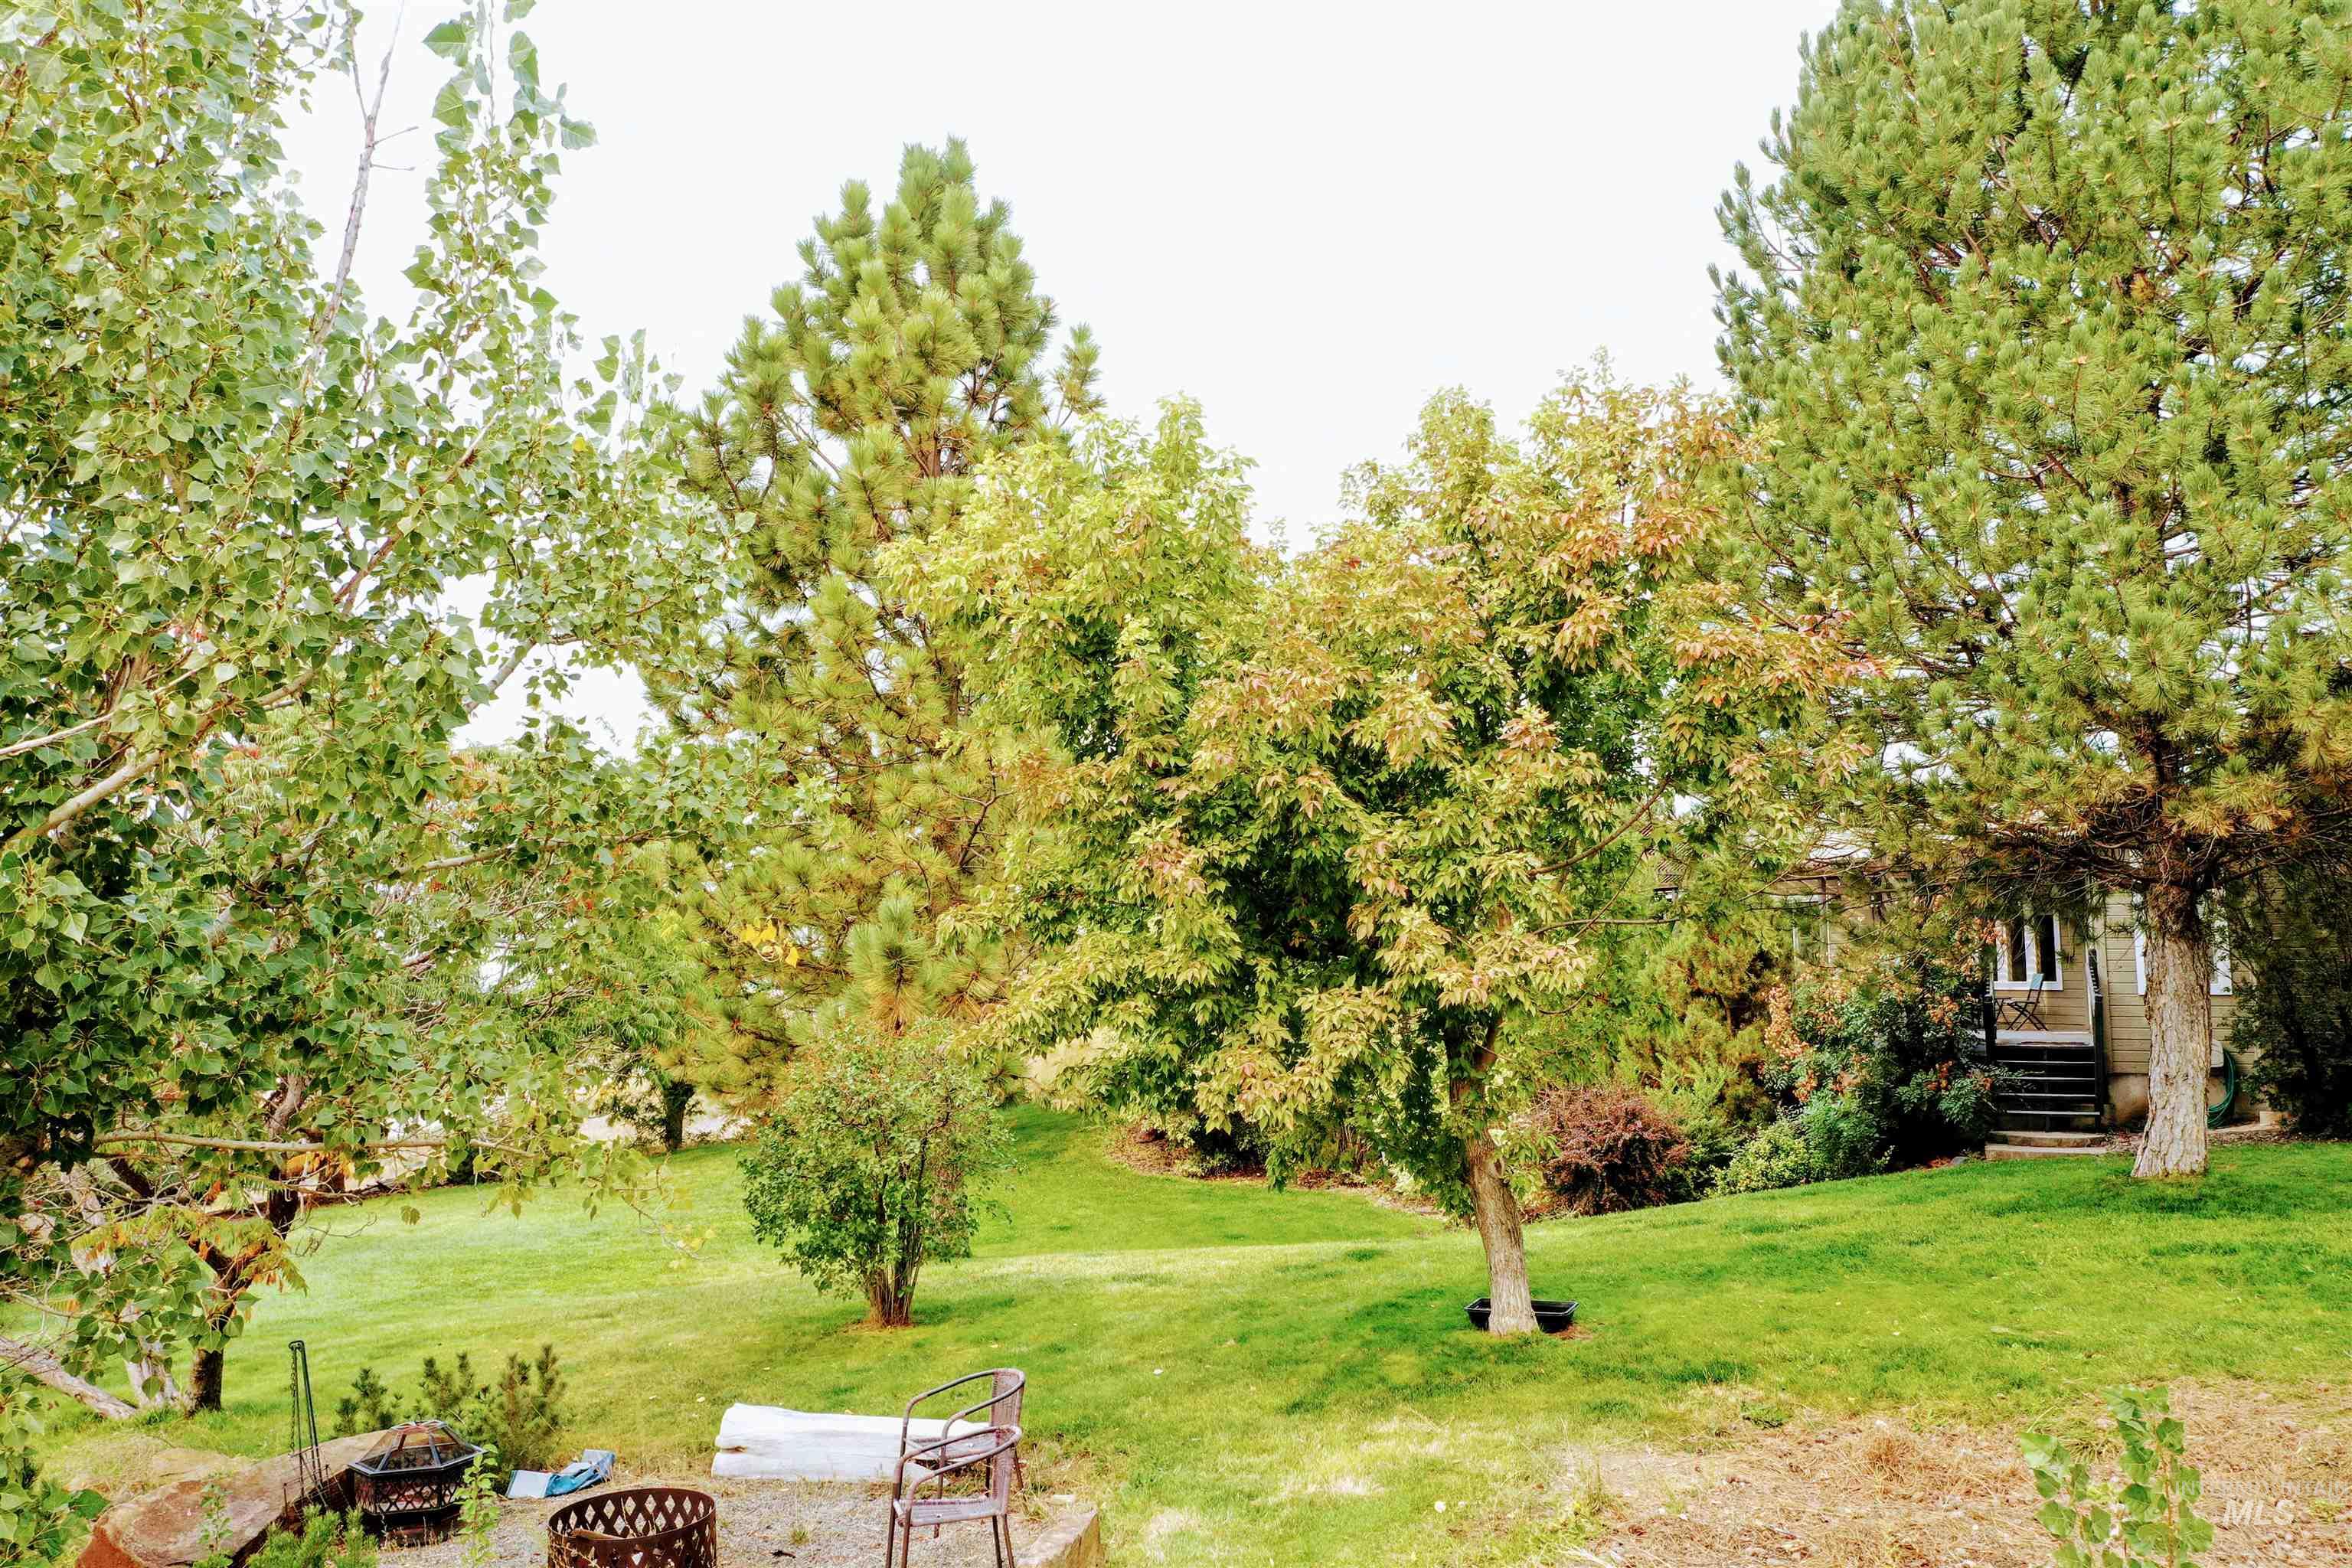 1925 Glenway Ave., Fruitland, Idaho 83619, 4 Bedrooms, 2.5 Bathrooms, Residential For Sale, Price $900,000,MLS 98886347